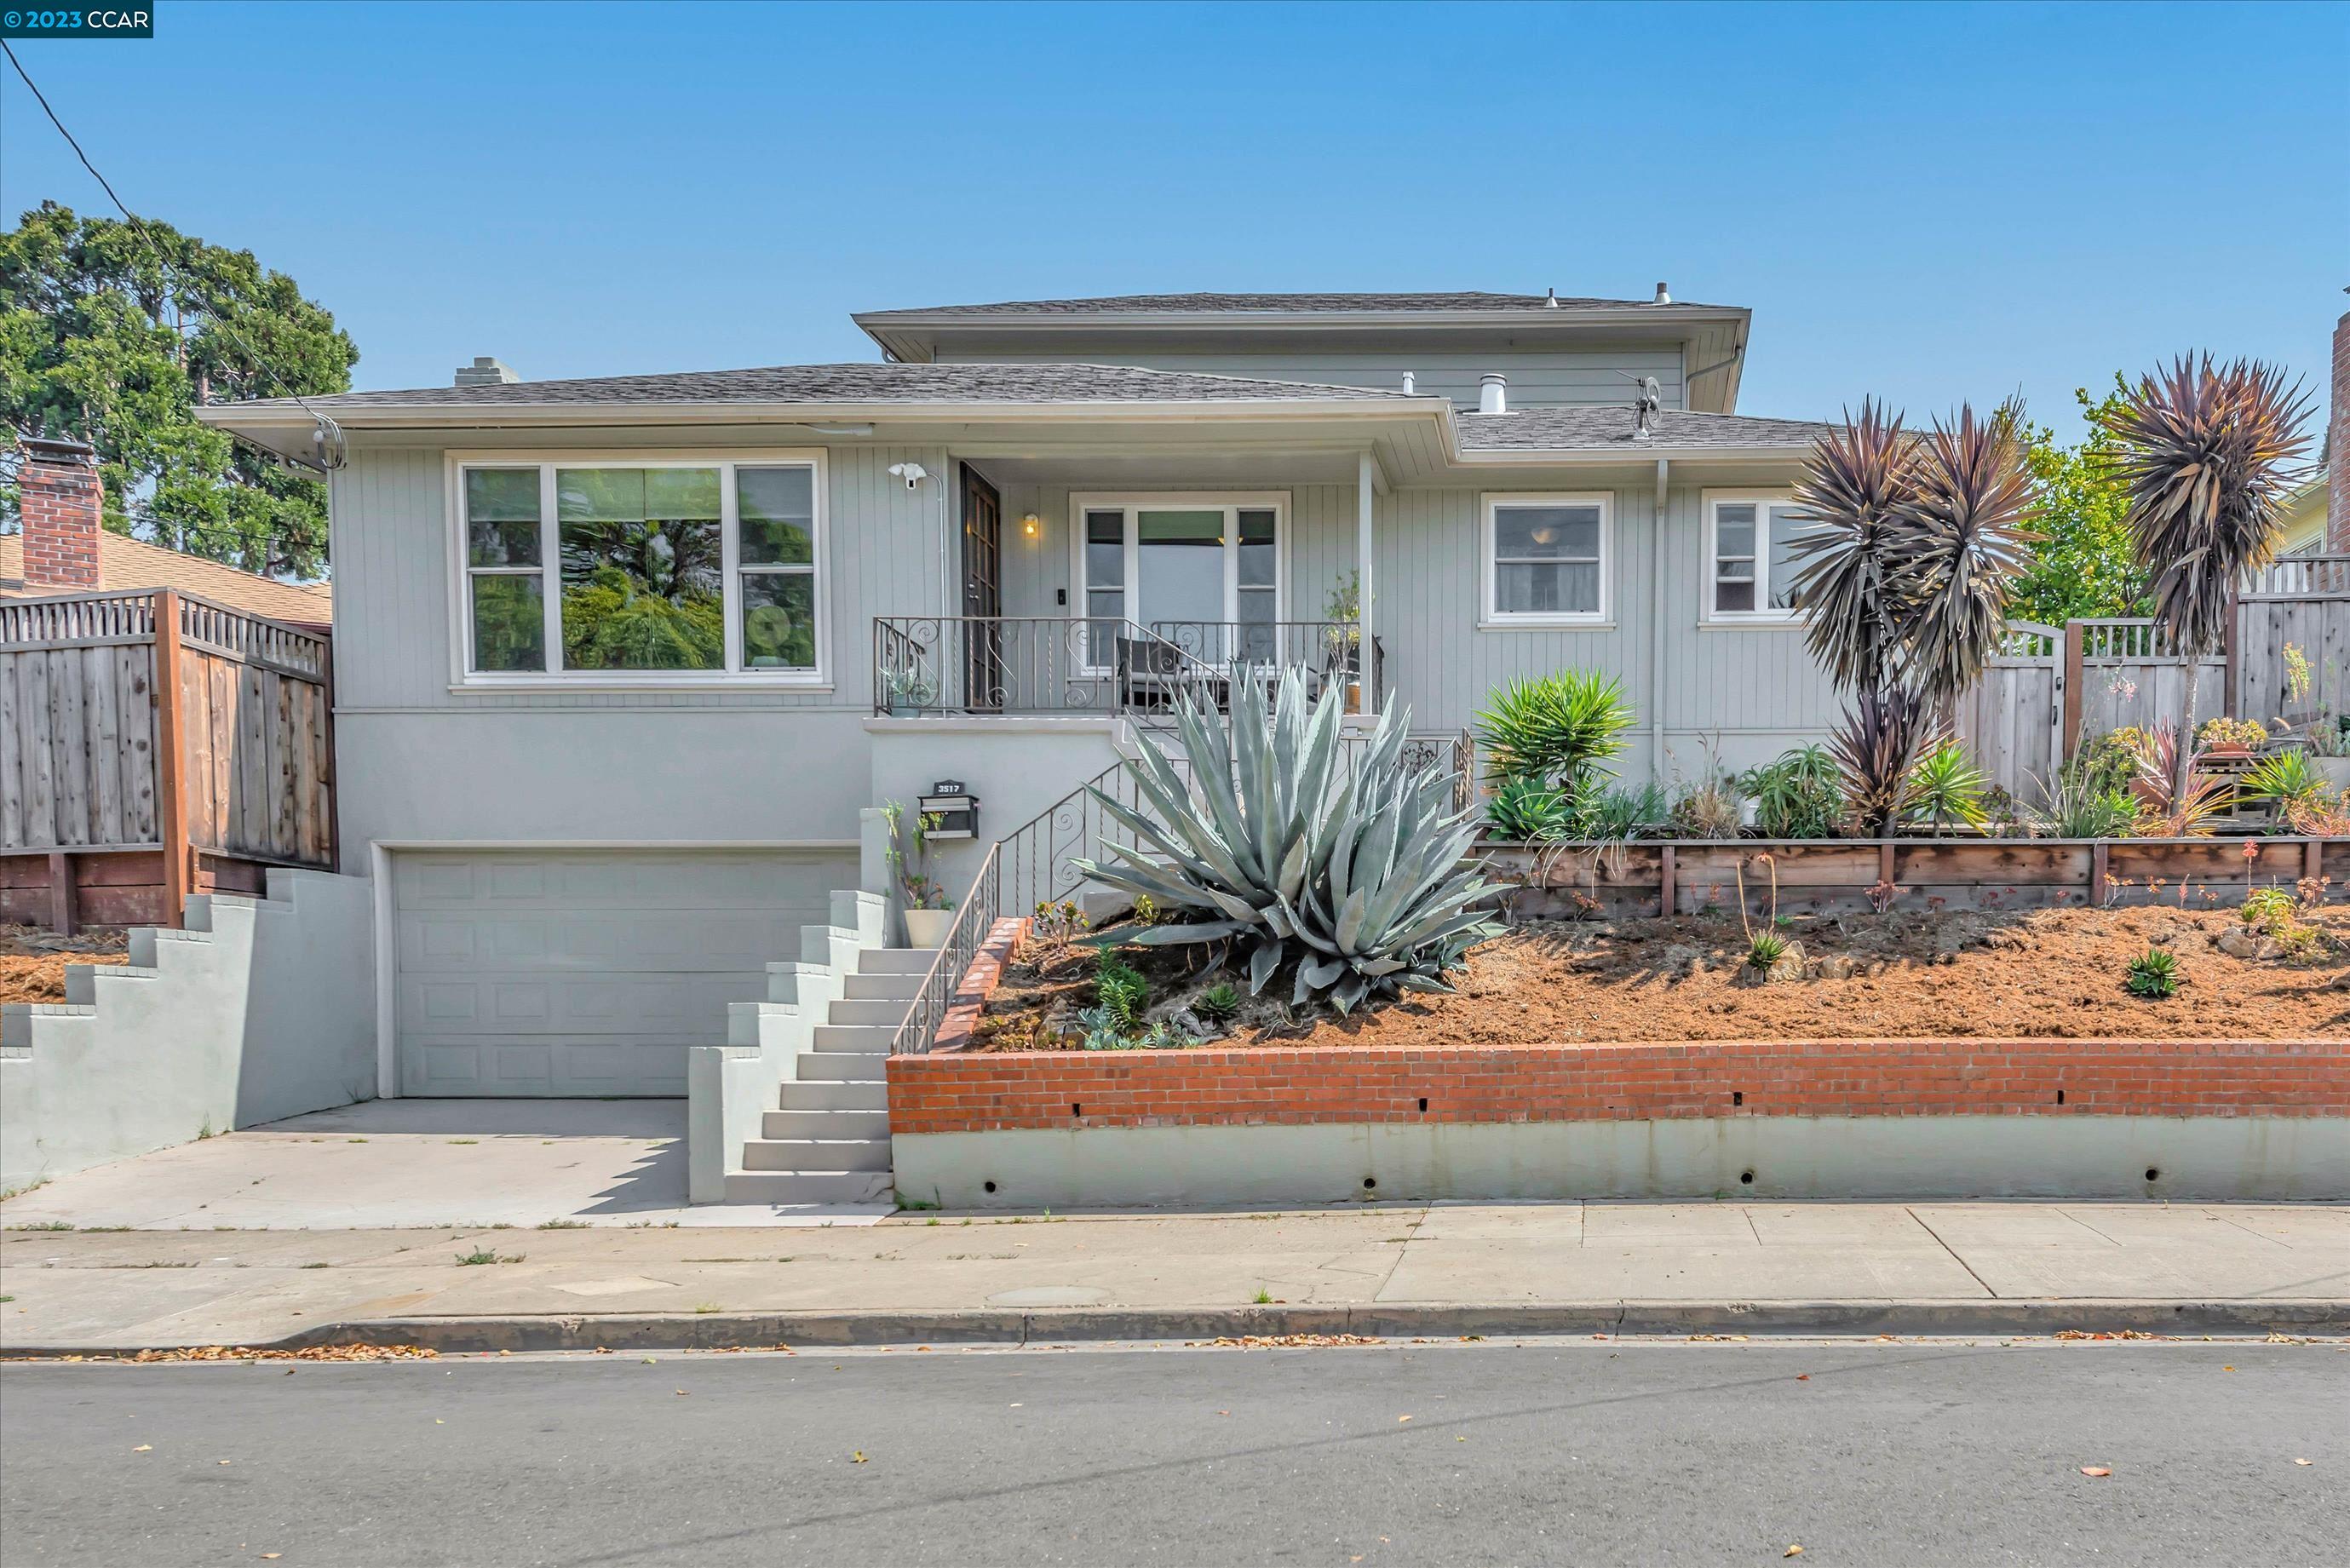 This spacious 1815 sq. ft. mid-century gem in Maxwell Park boasts 4 bedrooms, 2 baths, and a wealth of potential. Elevated on a level lot, it offers breathtaking panoramic views of the Oakland hills and the cityscape. Enjoy serene moments on the front porch with a steaming cup of coffee or tea while observing the world pass by. The front yard showcases drought-resistant succulents, with a blank canvas for your creative landscaping ideas. The low-maintenance backyard provides a private retreat, ideal for entertaining, complete with a covered patio and a gas fire pit. Inside, the large living and dining area is bathed in natural light, thanks to expansive, scenic, energy efficient windows and exquisite hardwood floors. A separate laundry room conveniently leads to the backyard, and the kitchen boasts tiled flooring and stainless-steel appliances. With its proximity to the 580 freeway, public transportation, and local amenities, this property offers convenience at your doorstep. This home possesses solid foundations, awaiting your imaginative touch to transform it into your dream residence. Contact me today for further details!